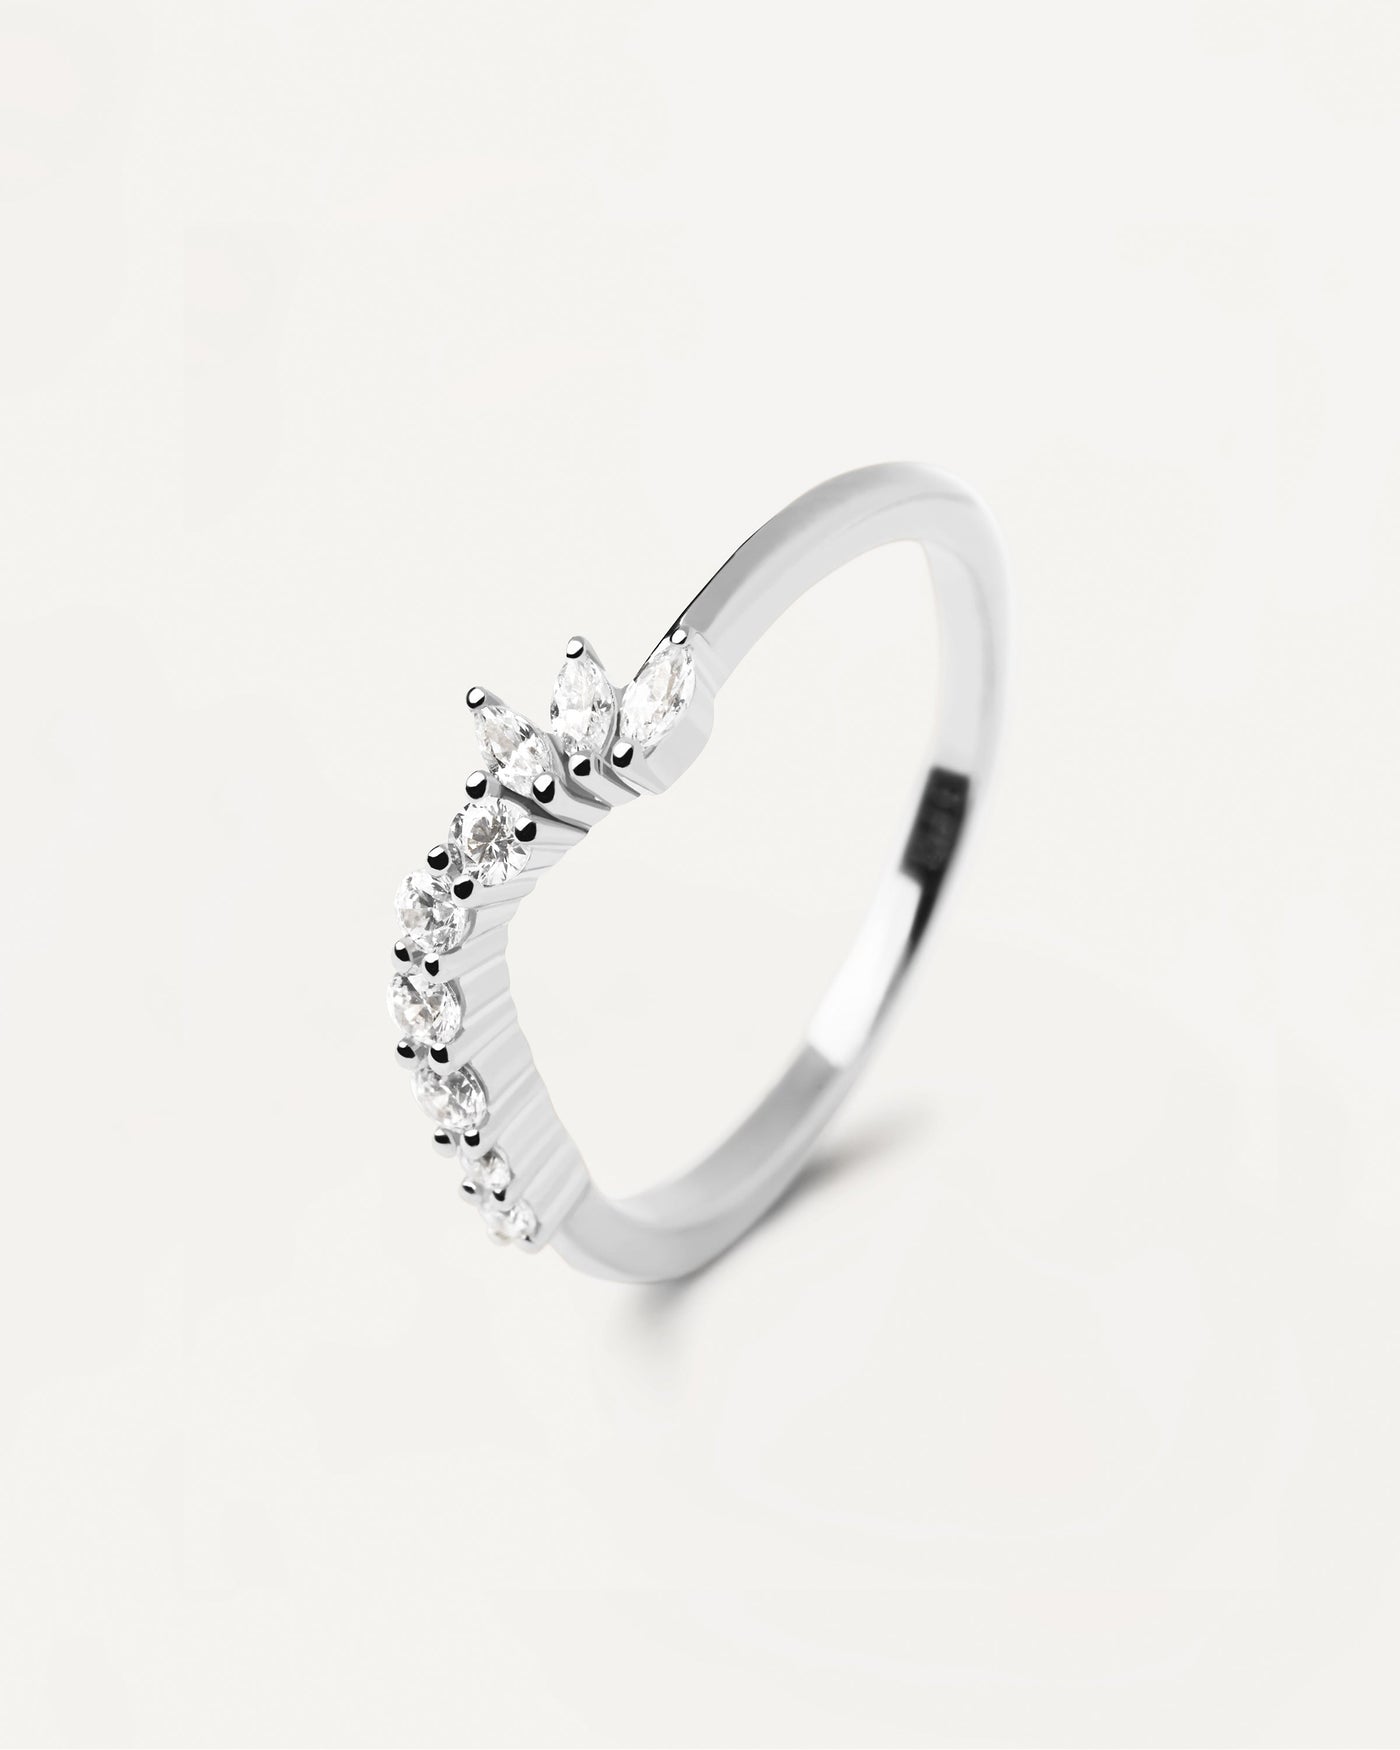 2023 Selection | Dance Silver Ring. Wavy sterling silver ring with white zirconia. Get the latest arrival from PDPAOLA. Place your order safely and get this Best Seller. Free Shipping.